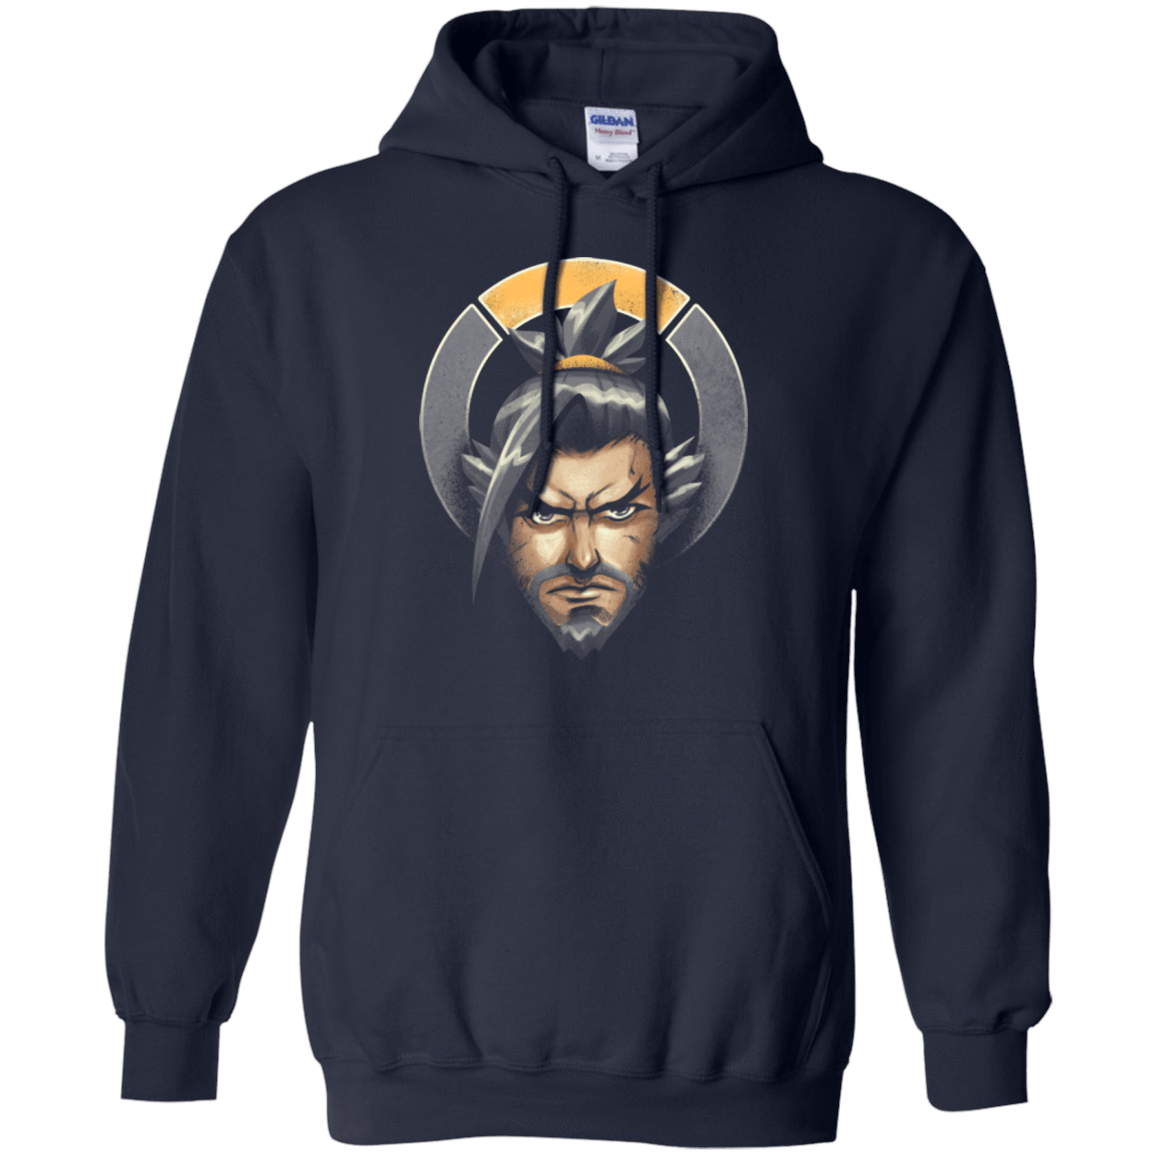 Sweatshirts Navy / Small The Bowman Assassin Pullover Hoodie